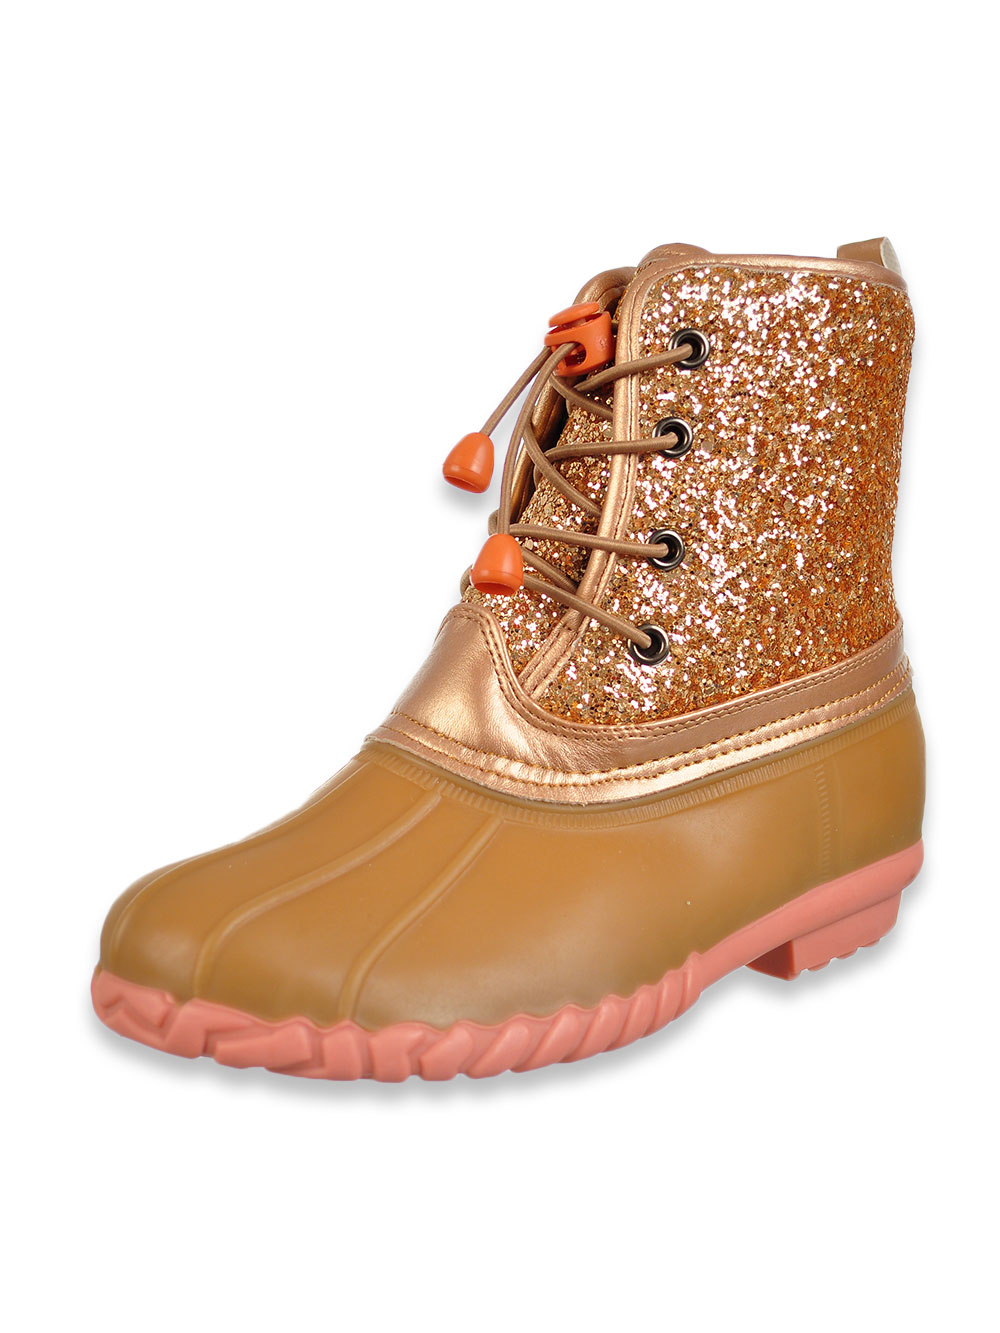 duck boots rose gold